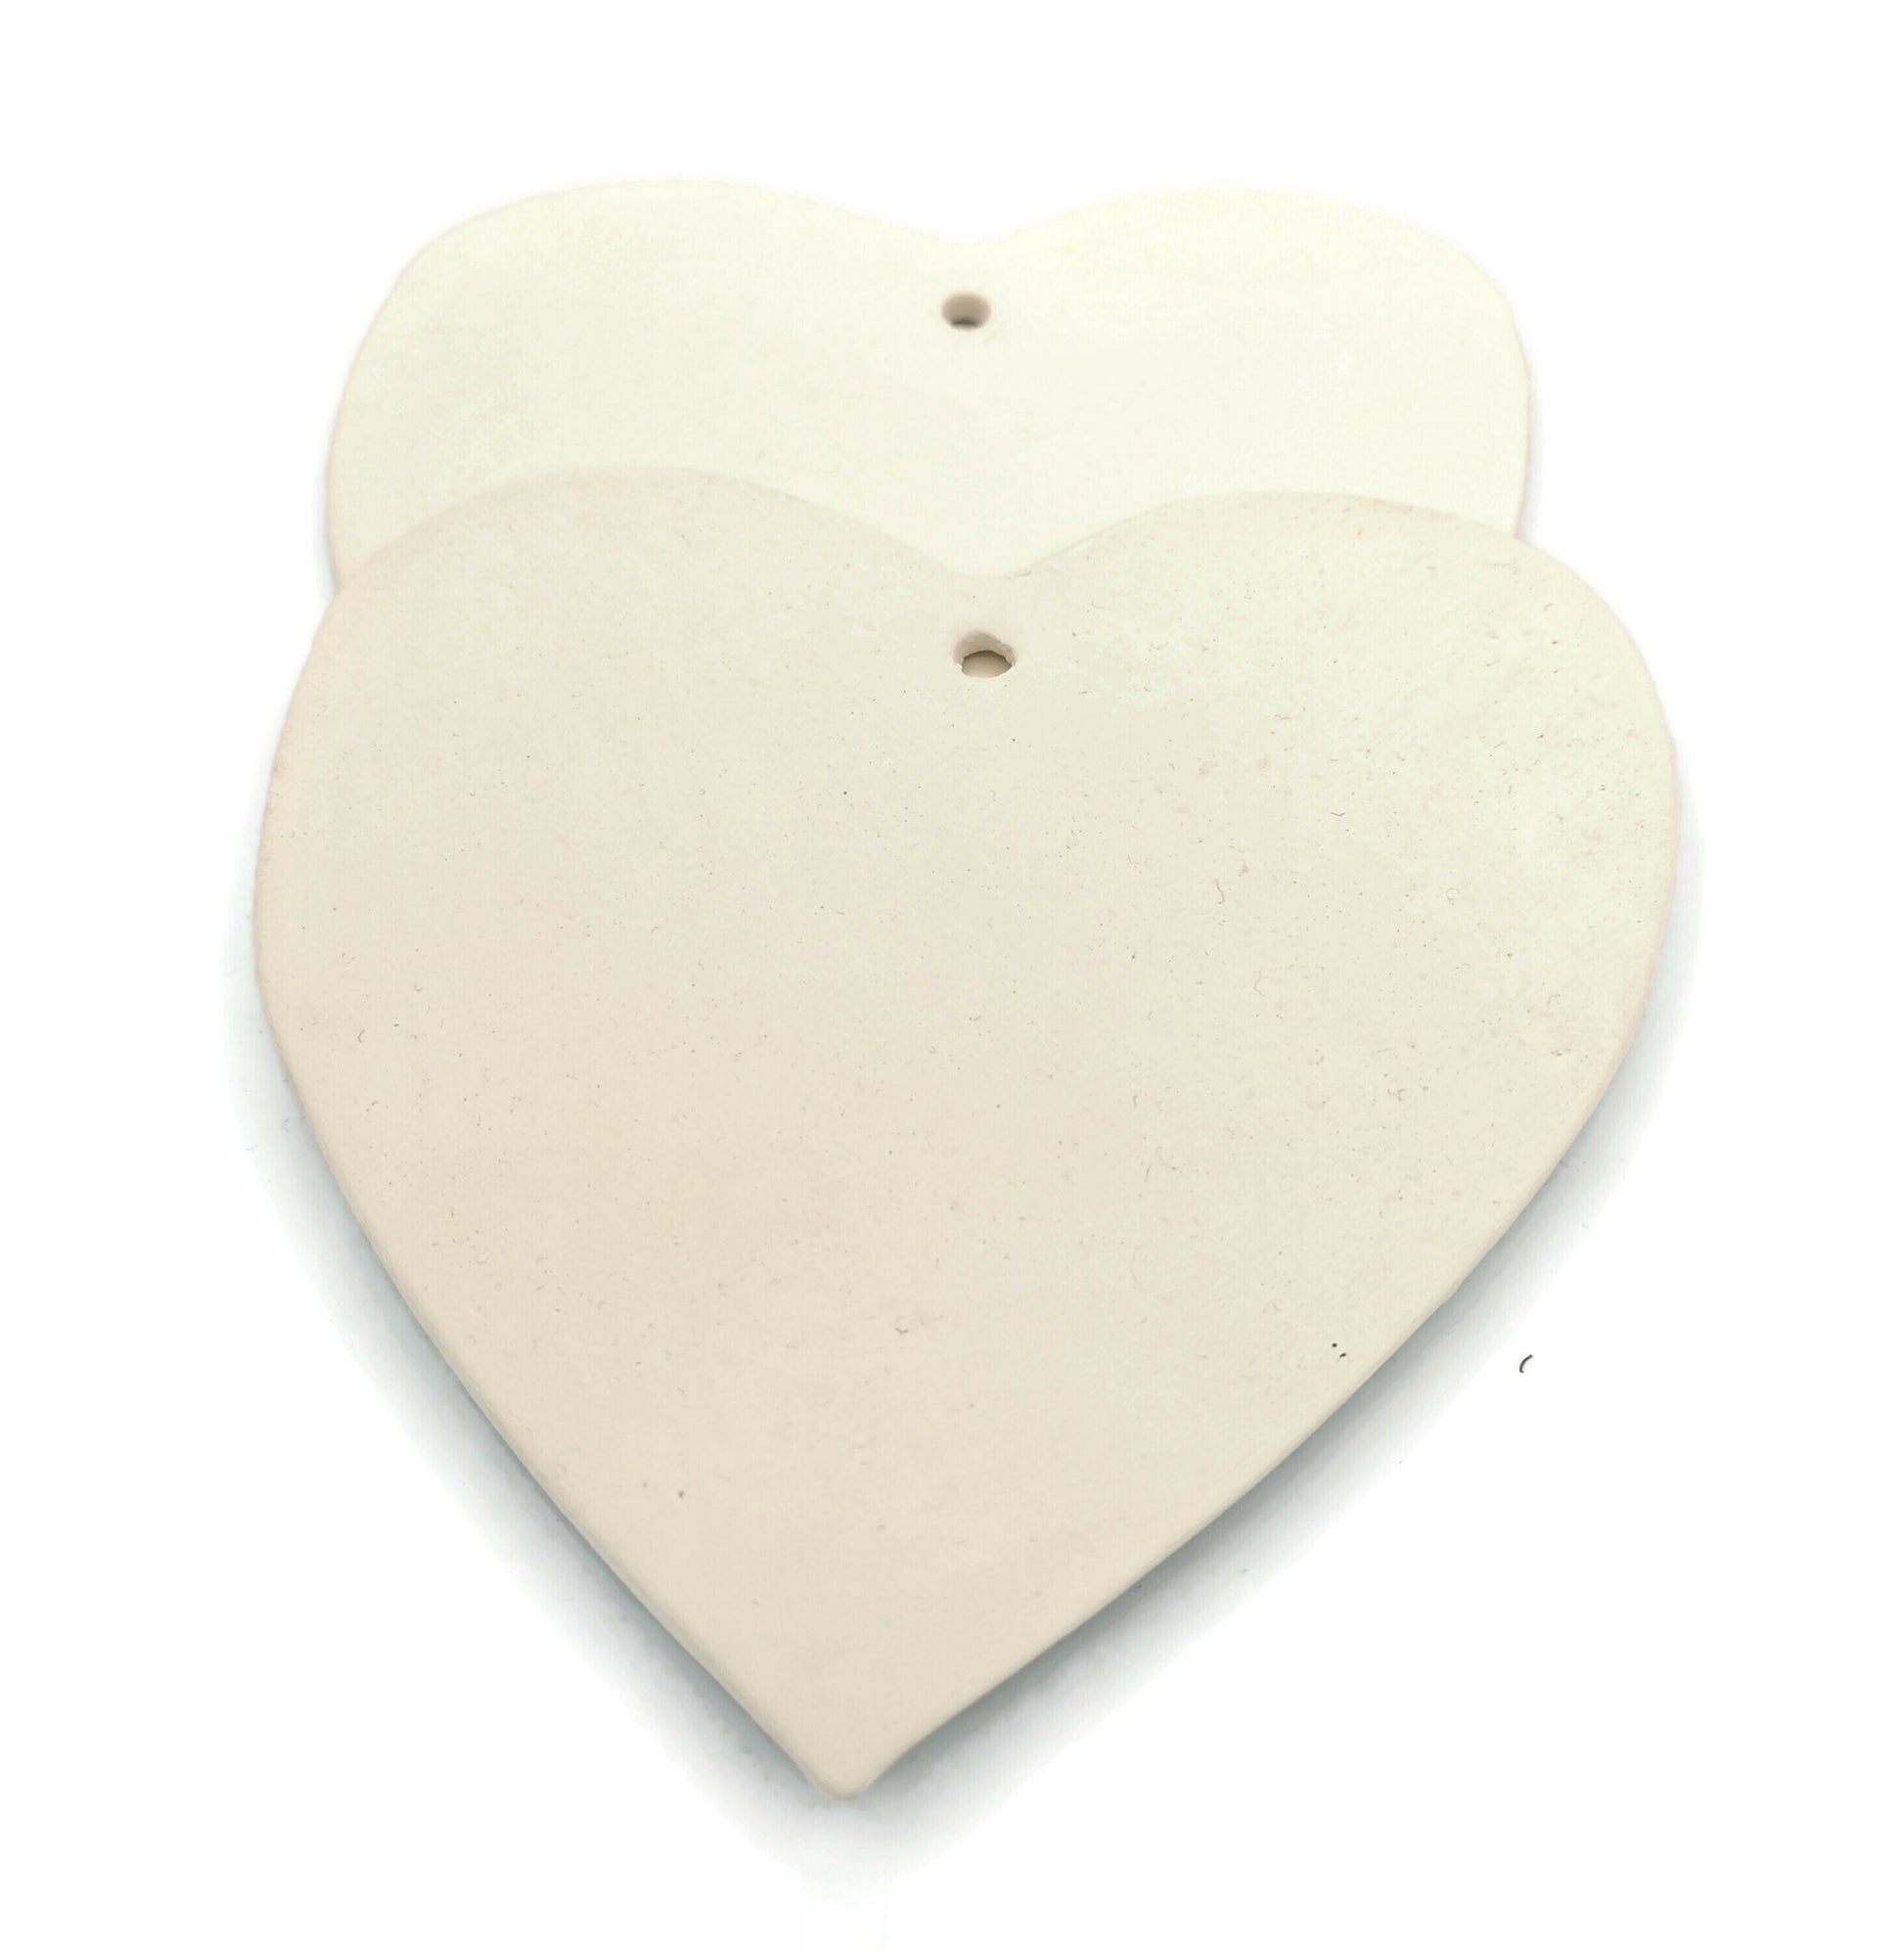 2Pc blank ceramic heart ornament, craft kits for adults, unpainted ceramic bisque ready to paint, best sellers cute DIY gifts for mom - Ceramica Ana Rafael